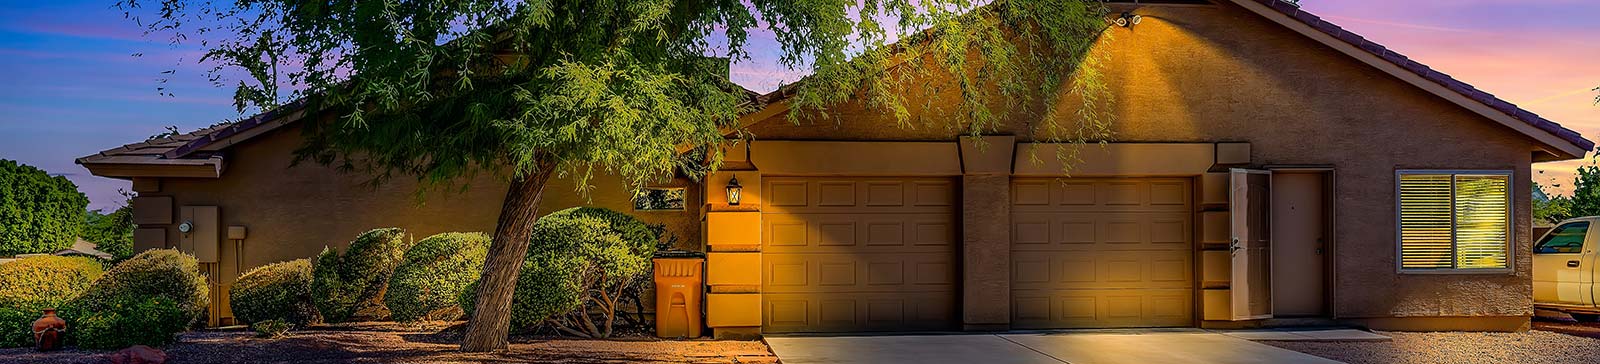 A house with a garage door